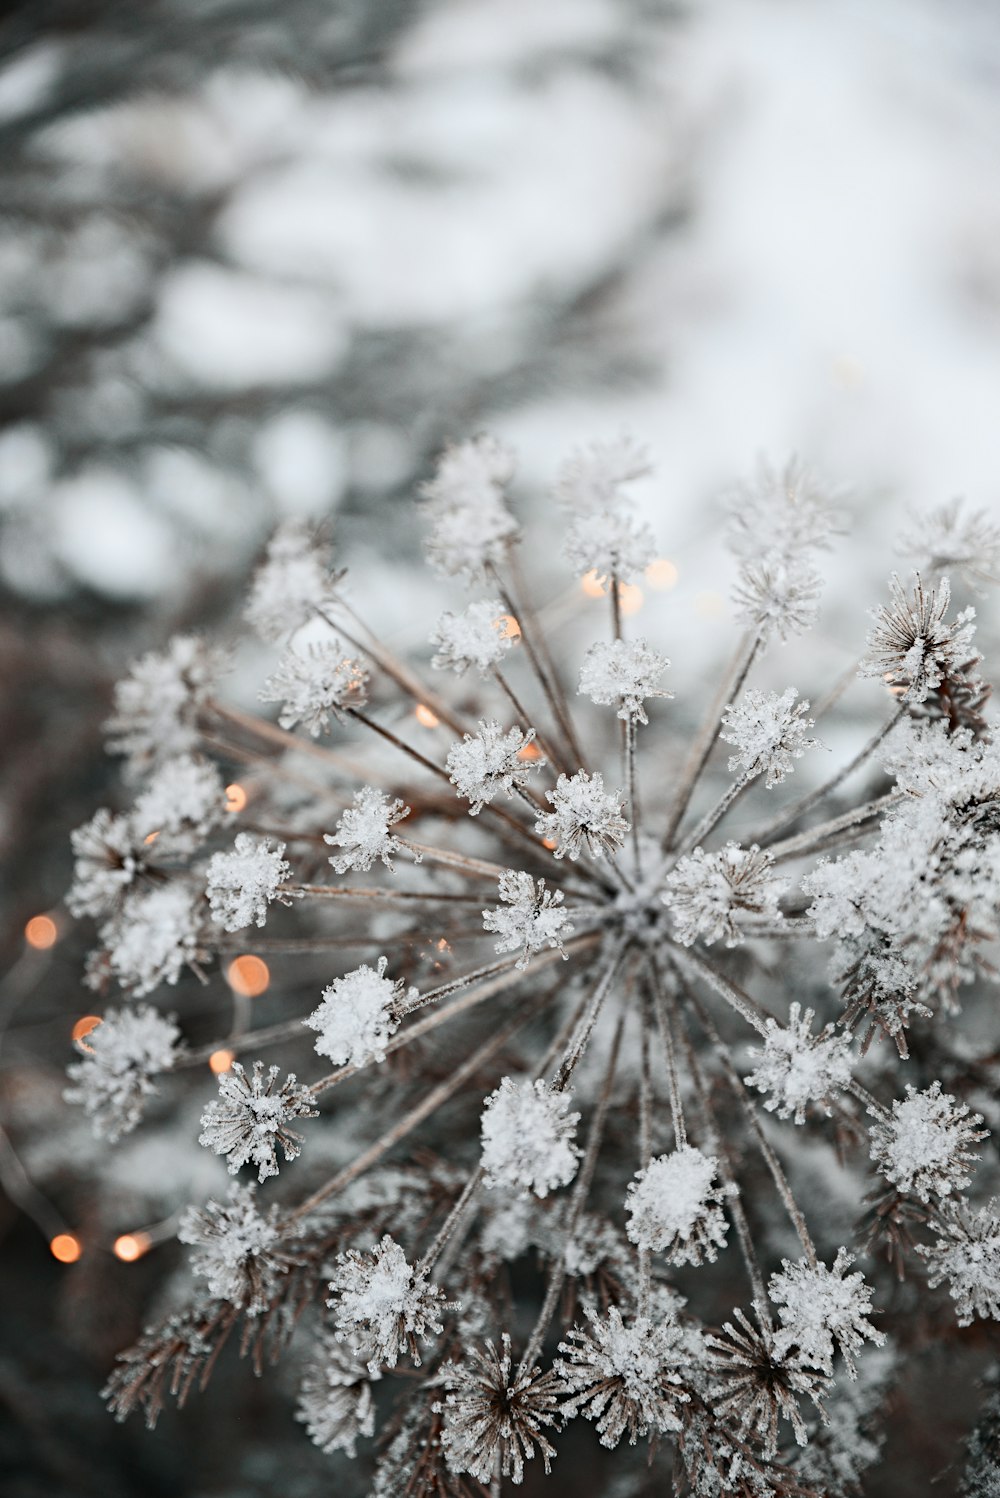 a close up of a snowflake with lights in the background